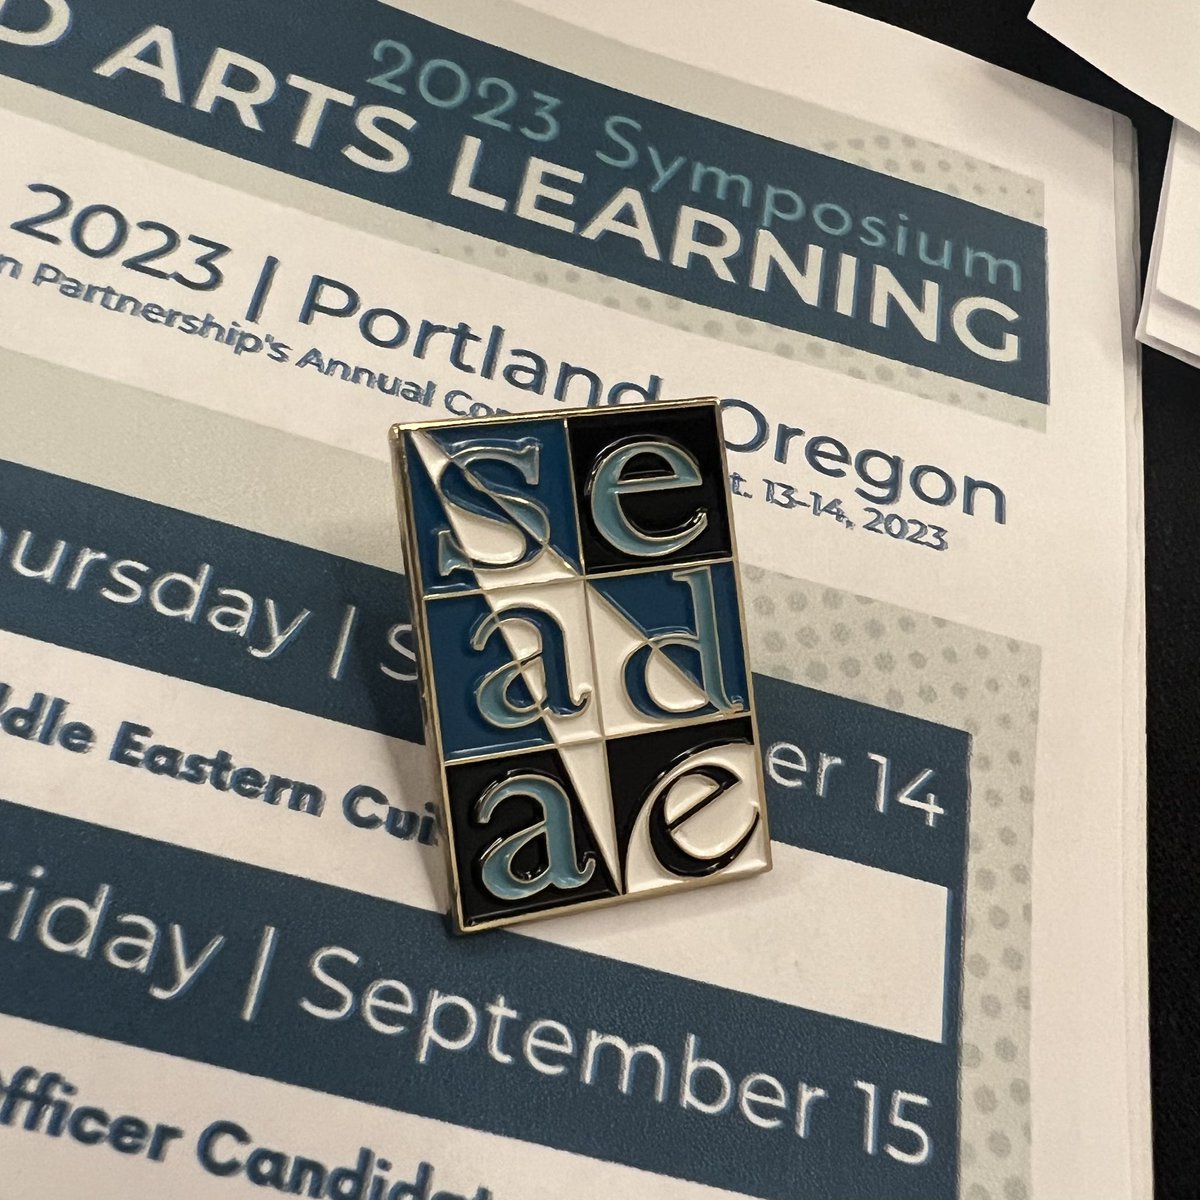 Thankful to be representing Ky at the State Education Agency Directors of Arts Education (SEADAE) Symposium in Portland, Oregon. Looking forward to learning & sharing ideas about customized Arts learning & excited about conversations surrounding HQIRs! @UnitedWeLearnKY @_SEADAE